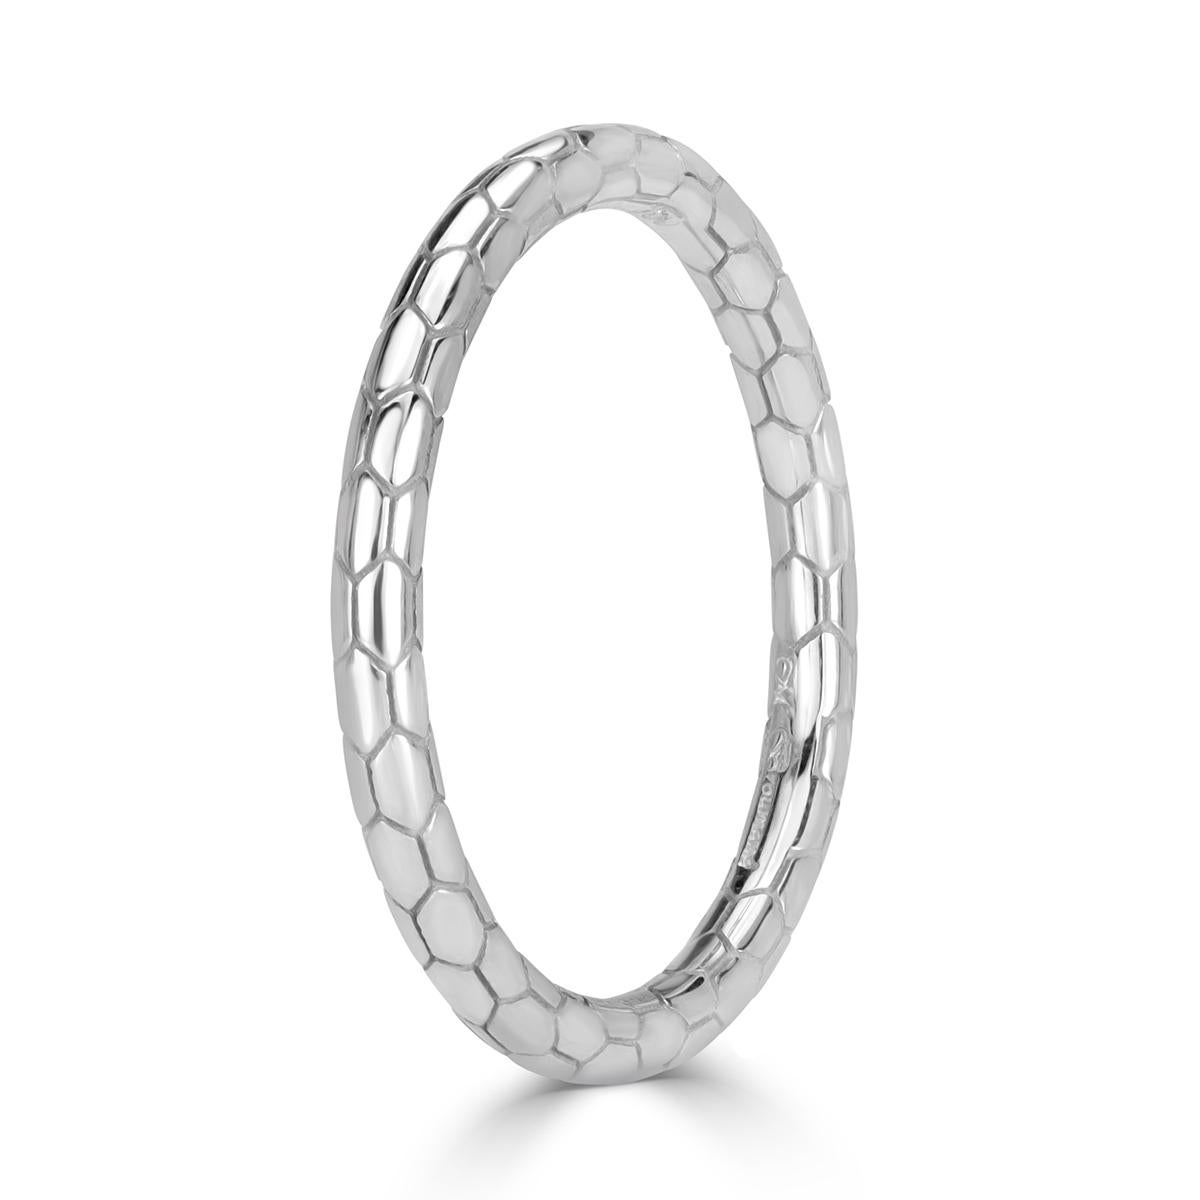 Created in 18k white gold, this stylish wedding band showcases an exquisitle scale pattern throughout. It also comes in 18k yellow, rose gold and platinum.